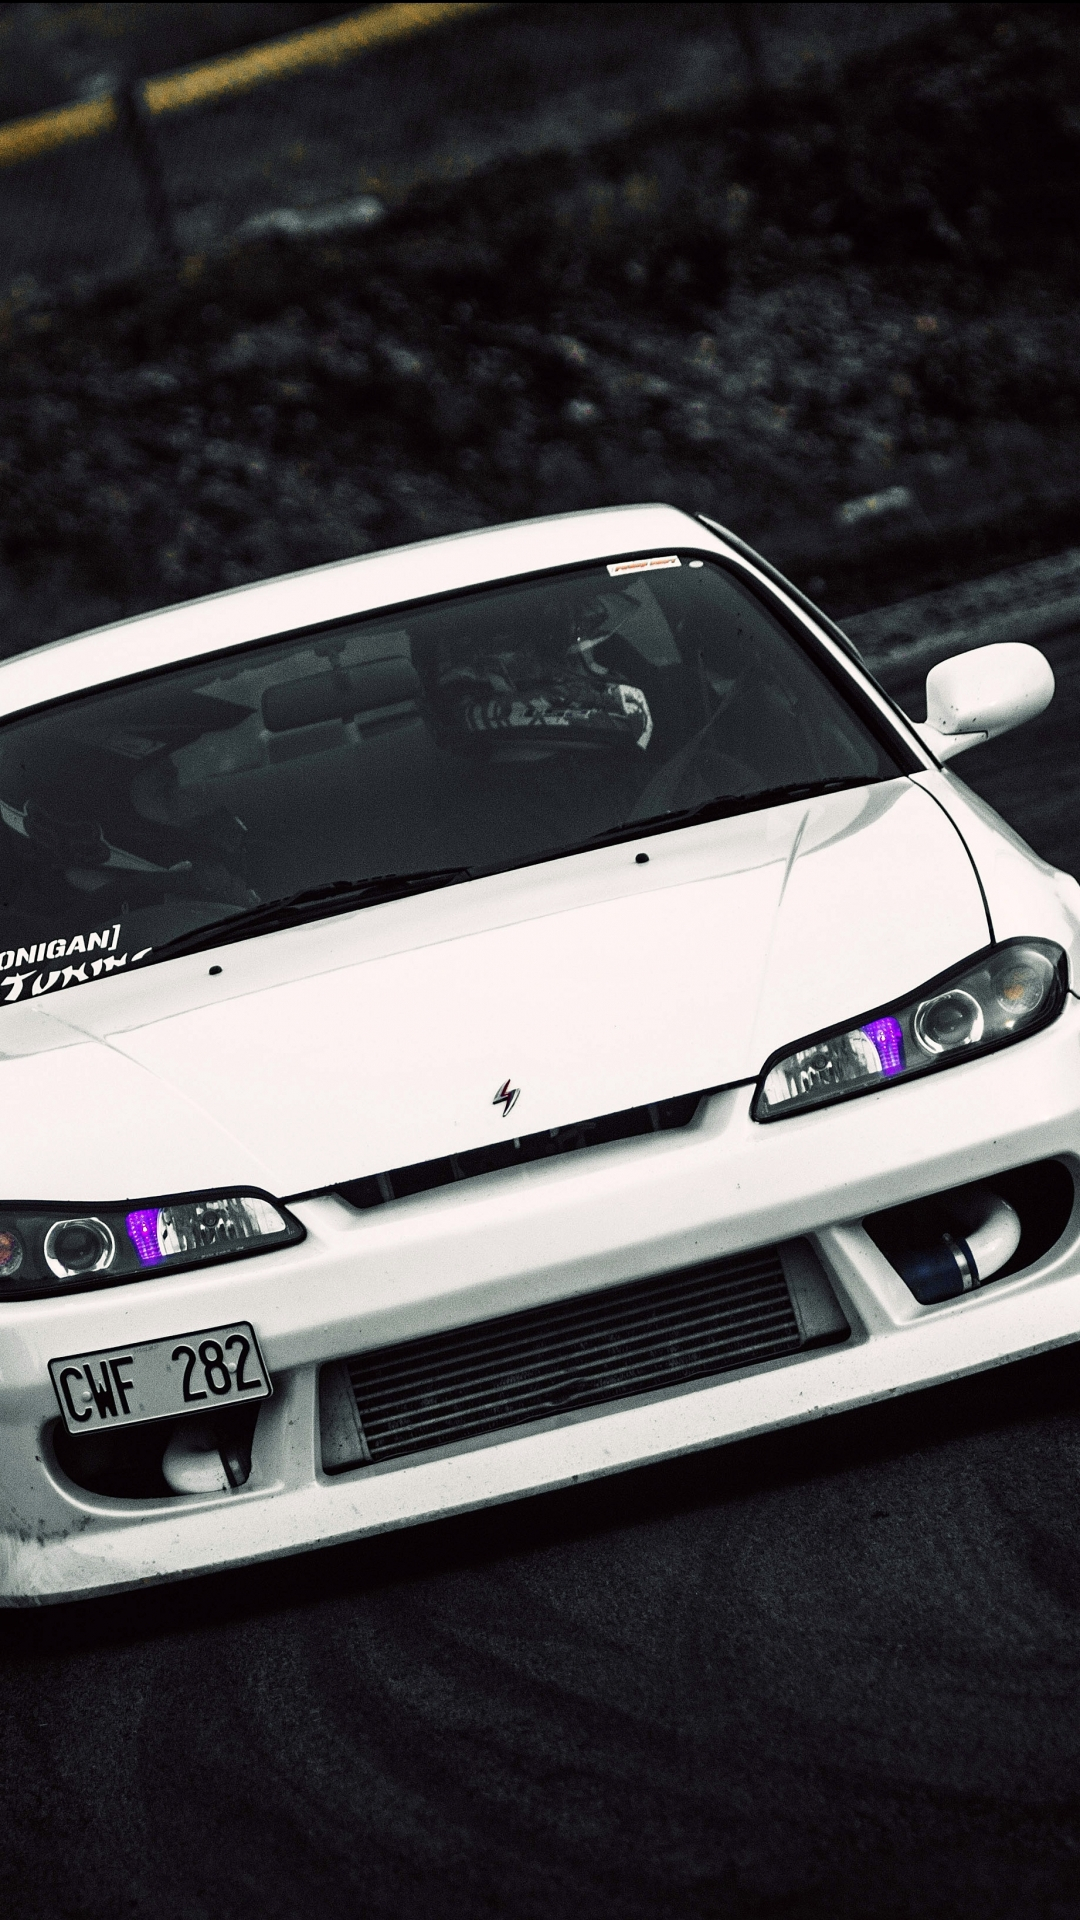 1080x1920 Nissan Silvia S15 Phone Wallpaper Mobile Abyss